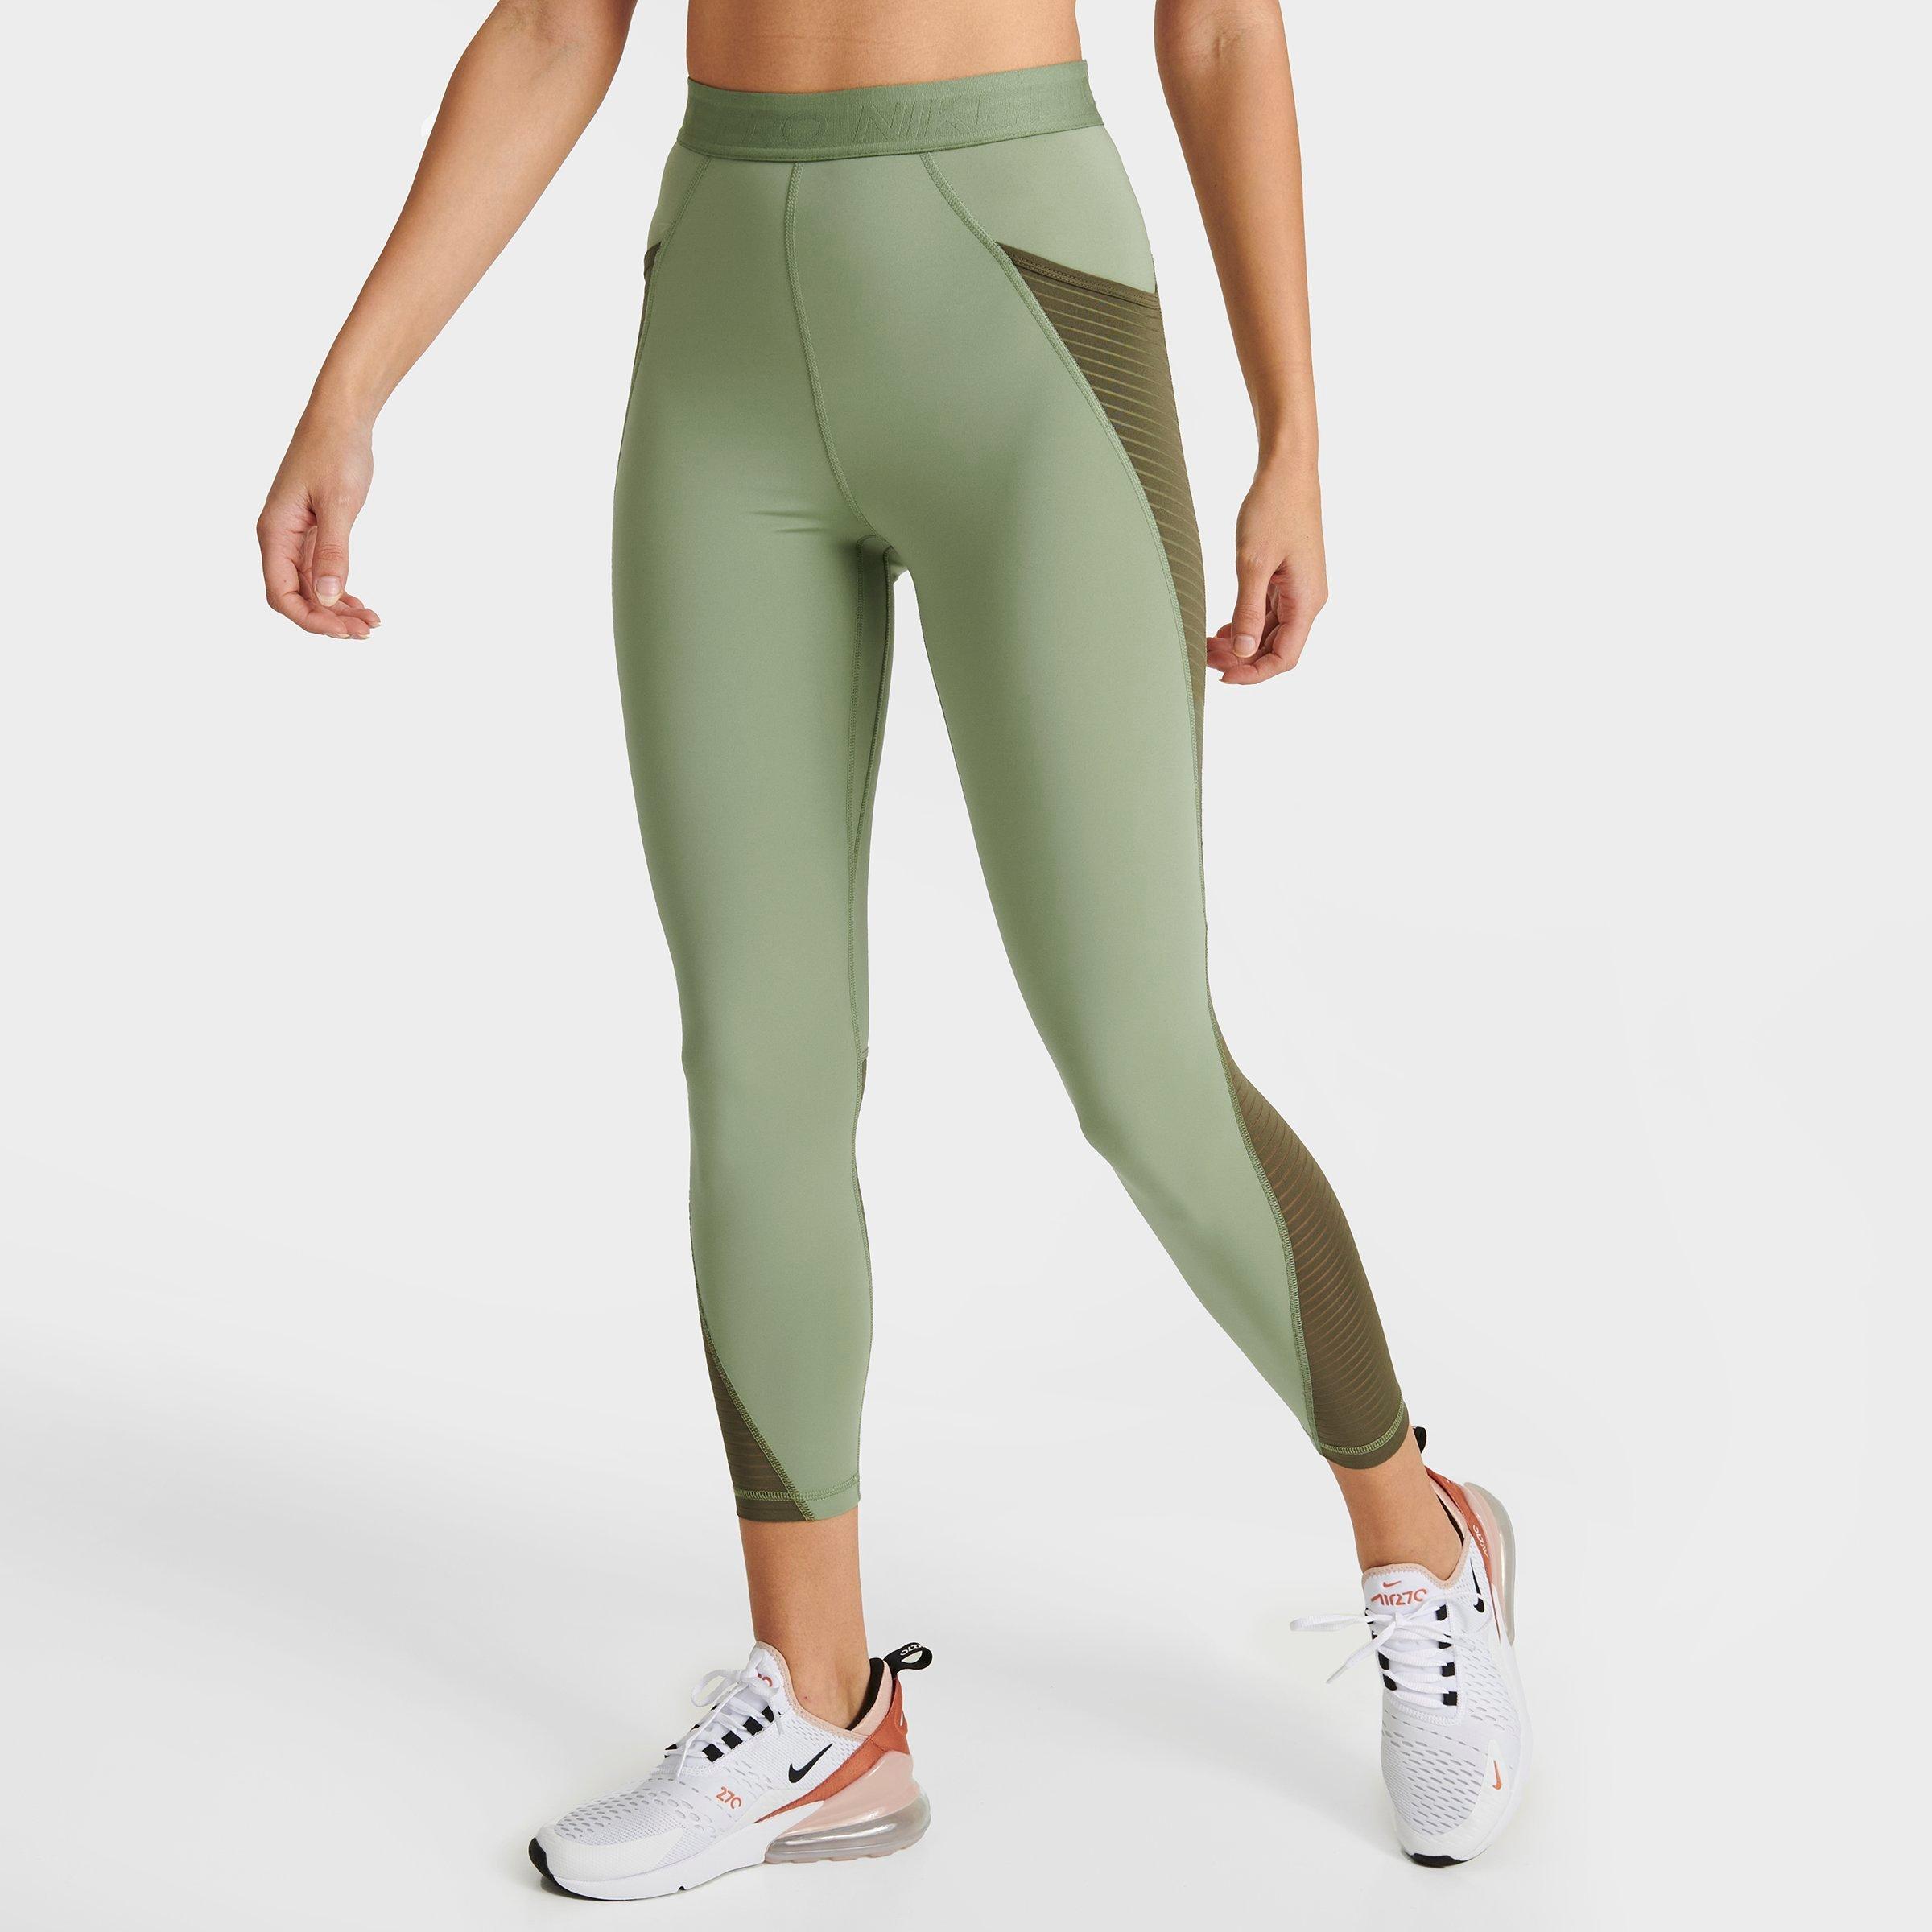 ADP ® Fluorescent stylish sports daily Joggers / leggings for